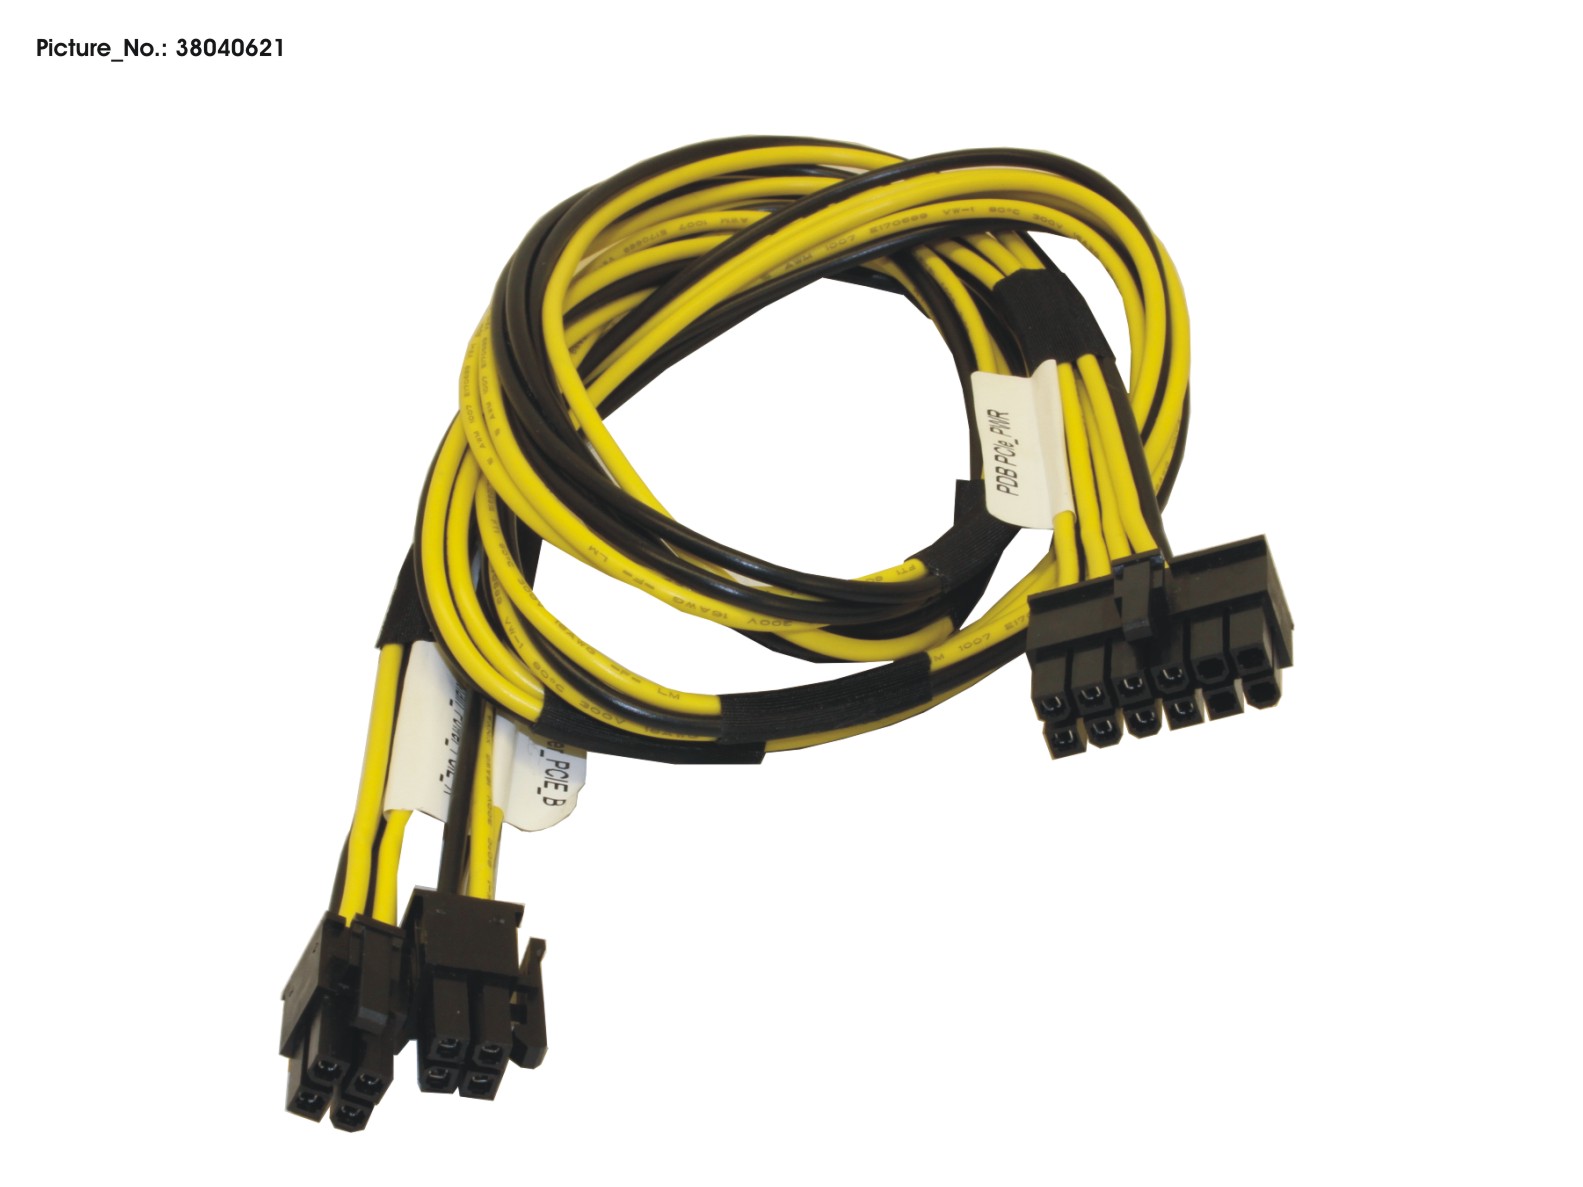 CBL POWER CABLE 3